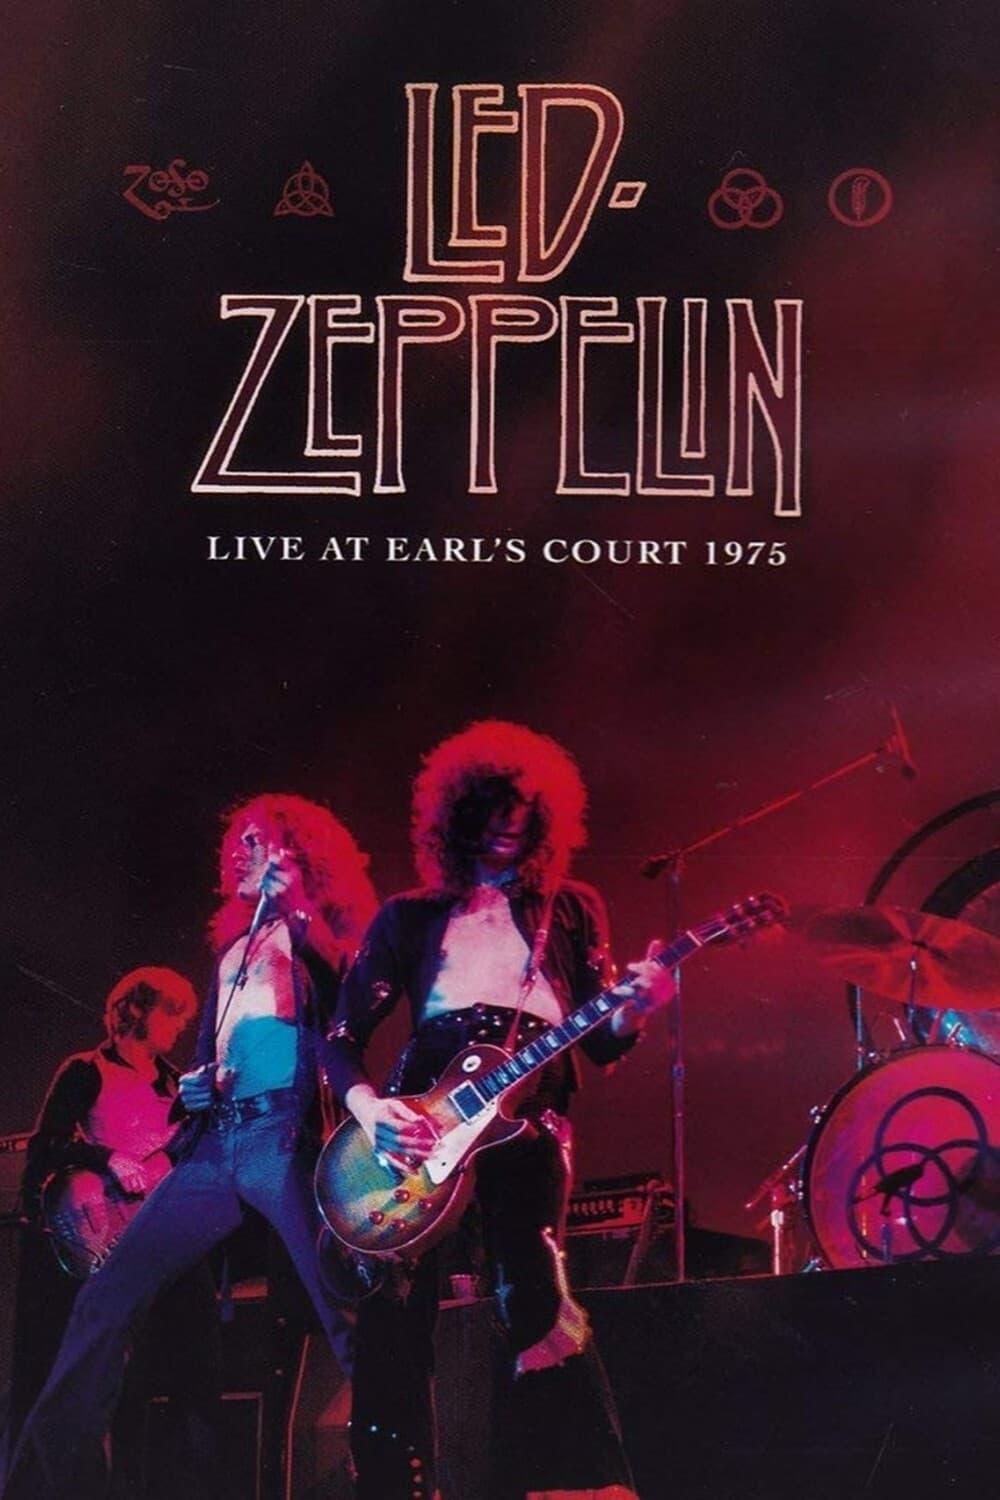 Led Zeppelin - Live At Earl's Court 1975 poster